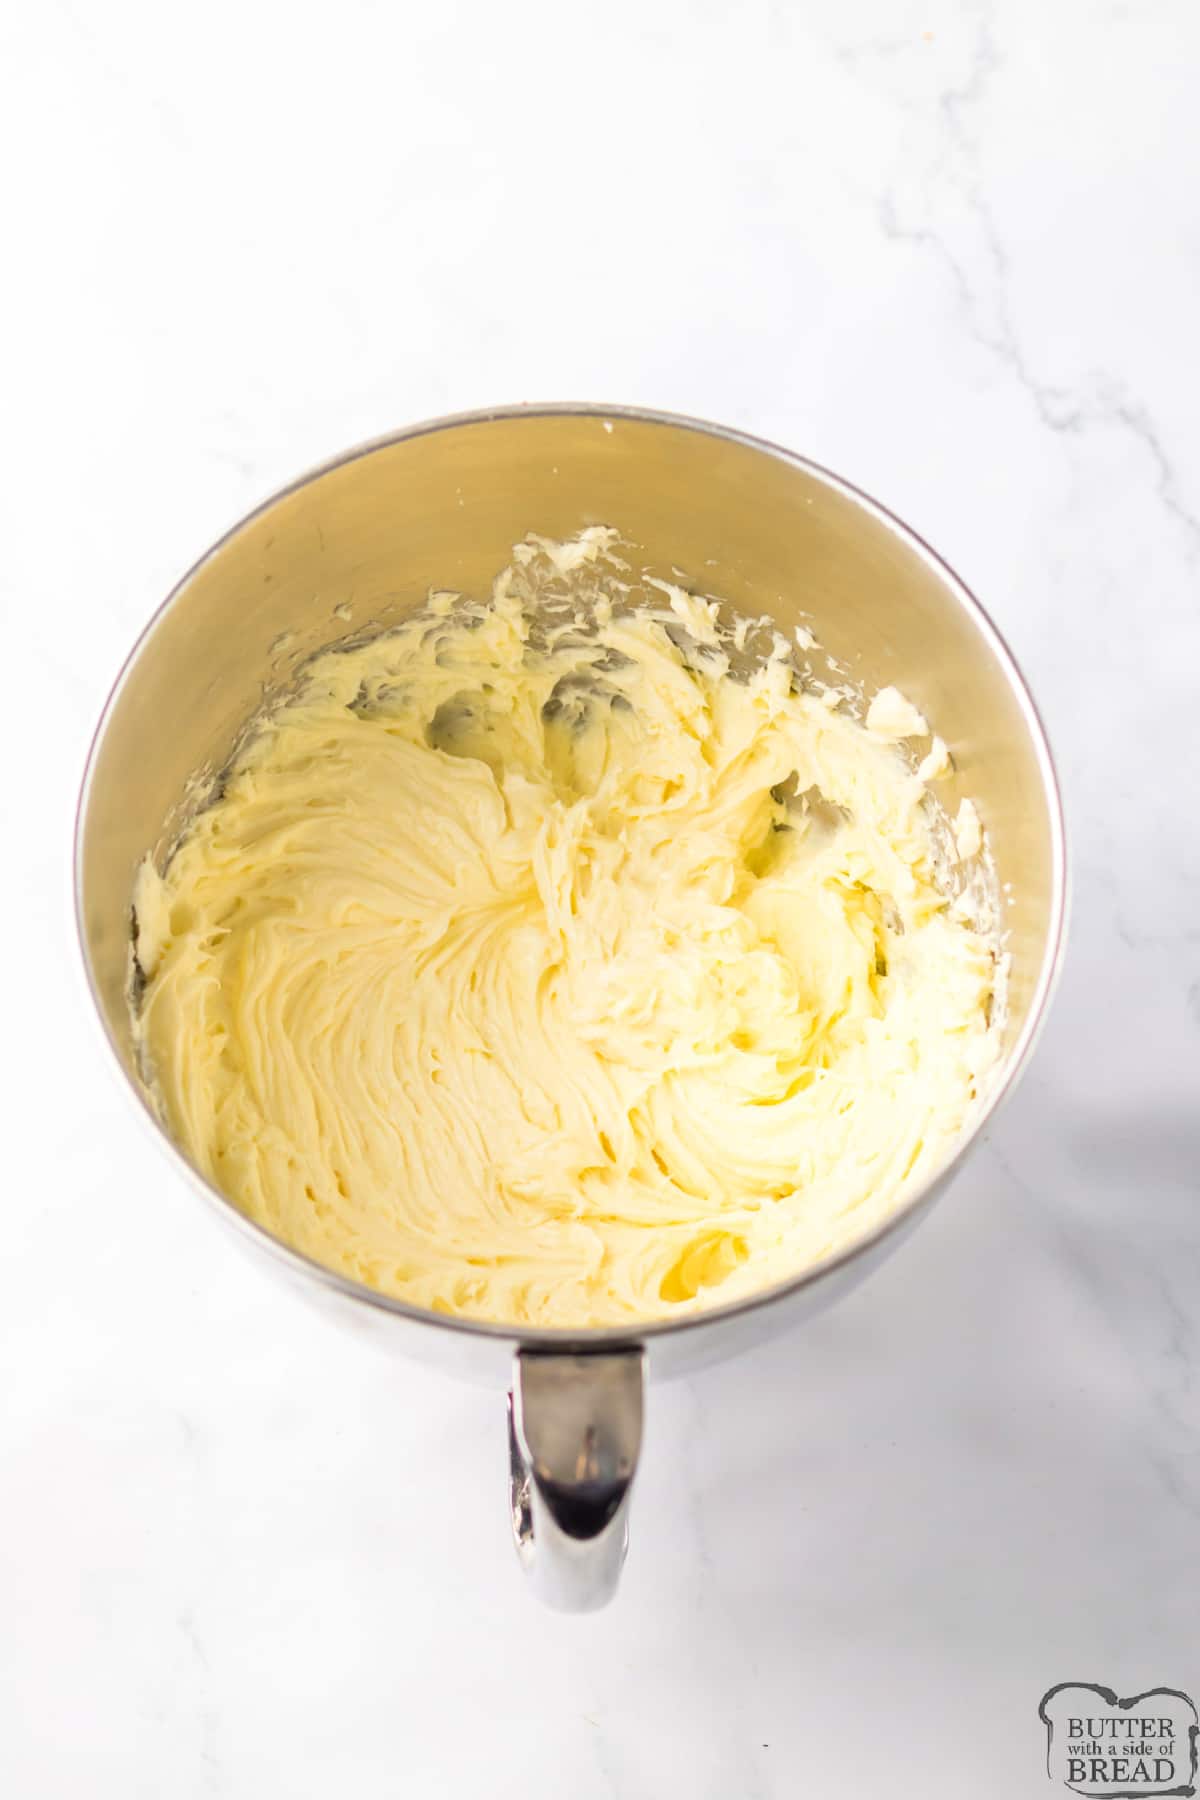 Beating cream cheese until smooth and fluffy.